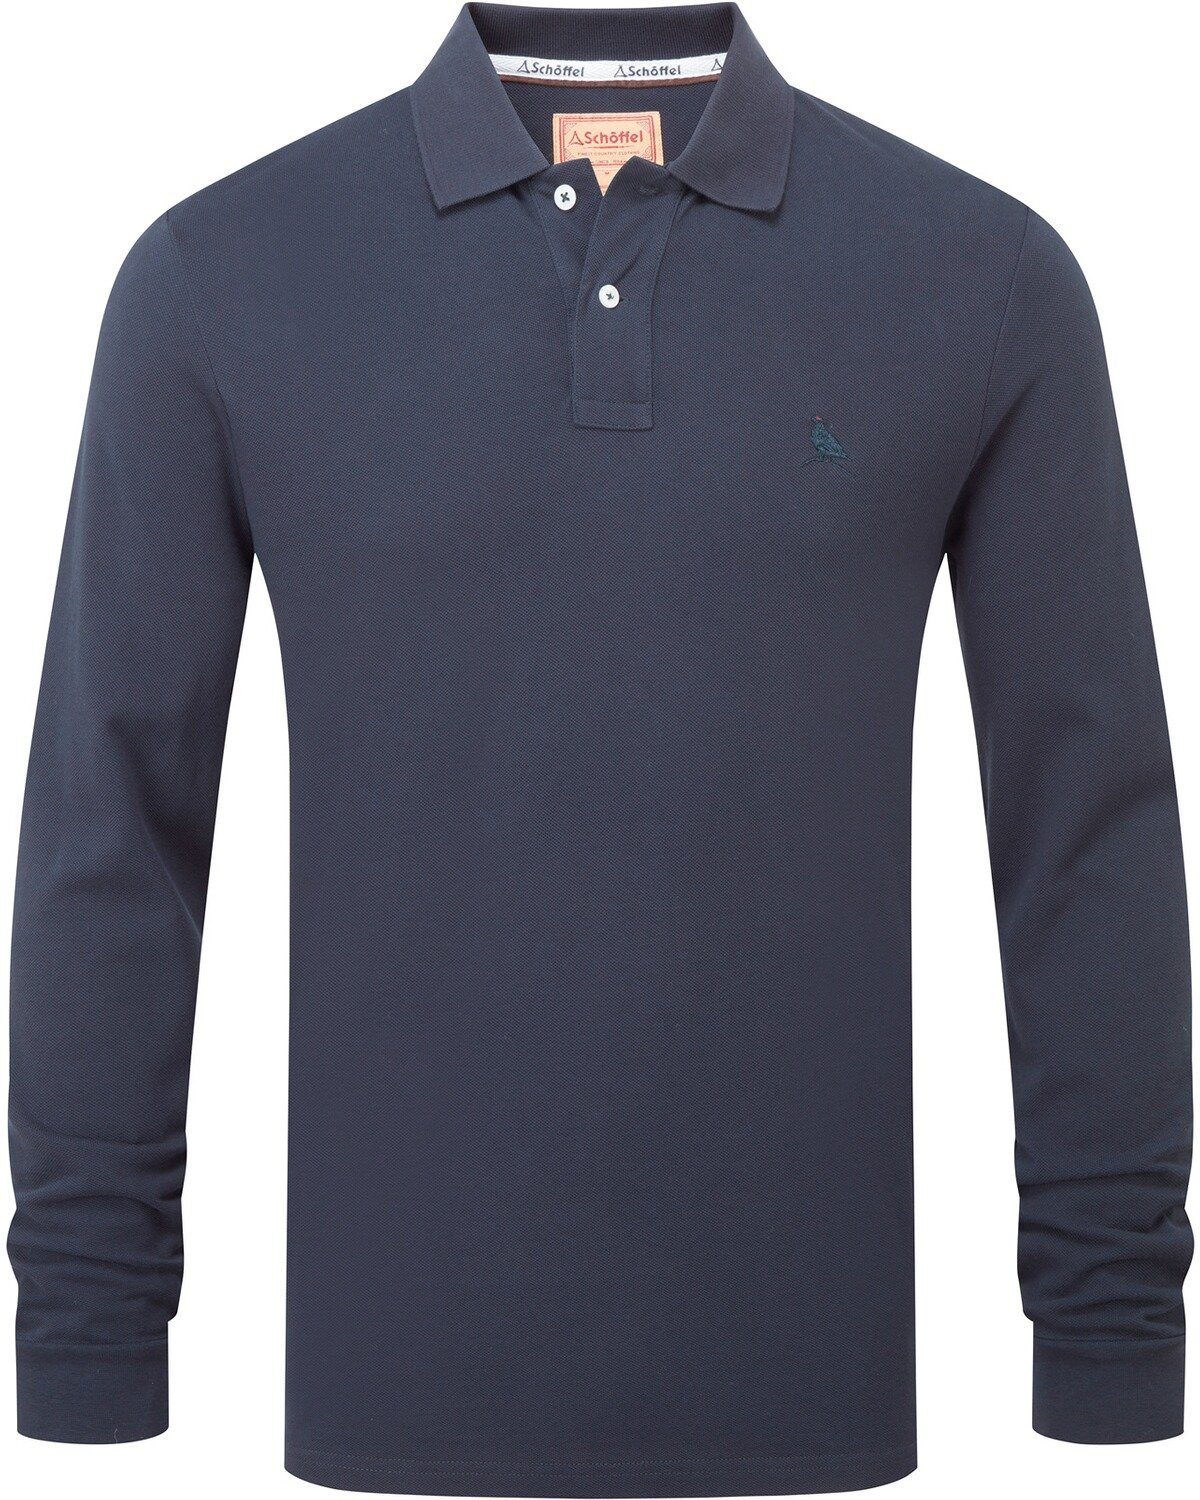 Country Navy Ives Rugbypolo Schöffel St. Poloshirt